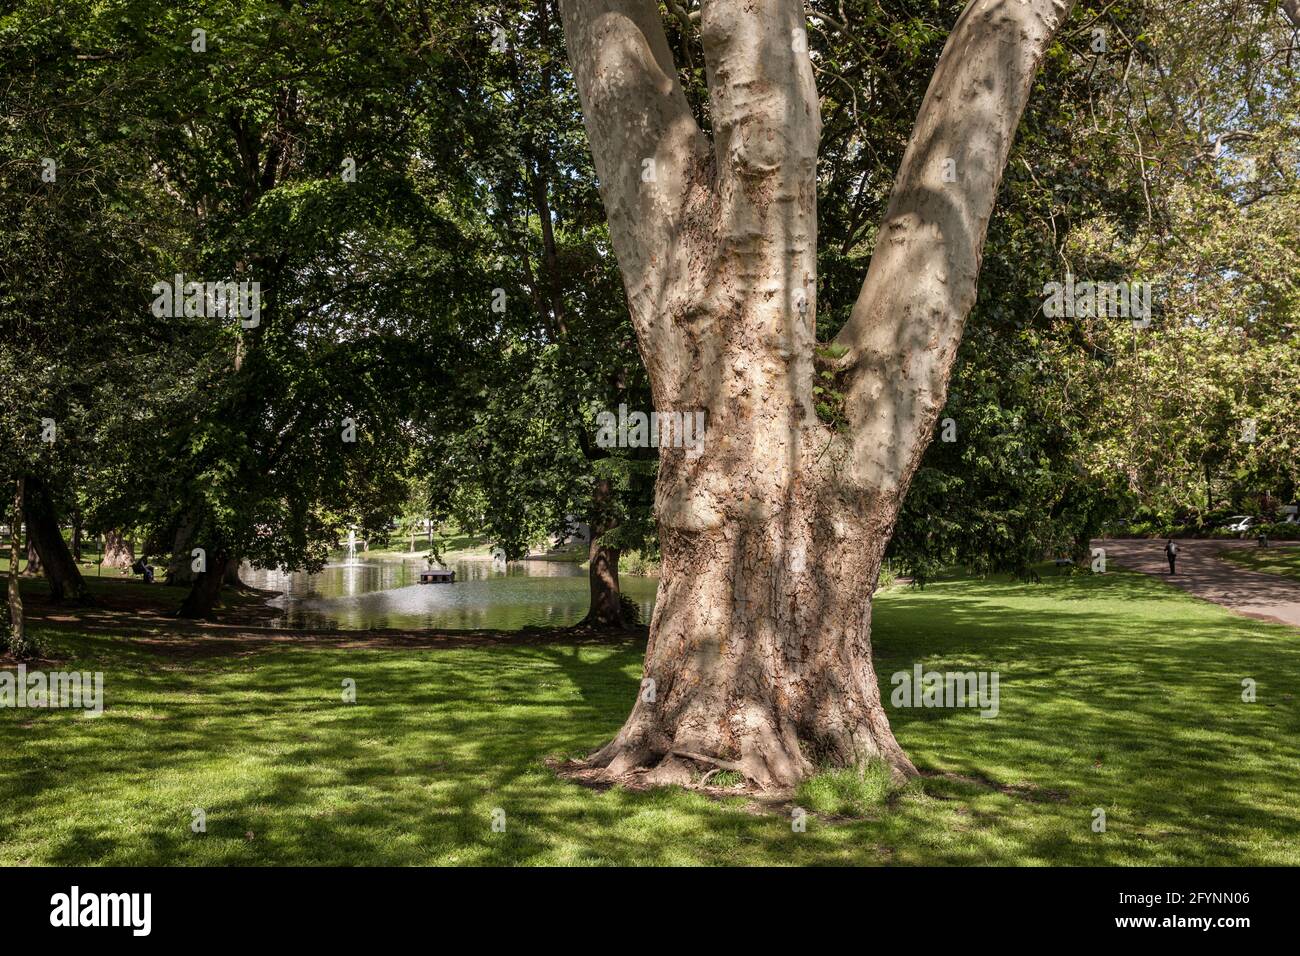 park at the Theodor-Heuss-Ring near the square Ebertplatz, trunk of an old plane tree, Cologne, Germany.  Park am Theodor-Heuss-Ring nahe Ebertplatz, Stock Photo